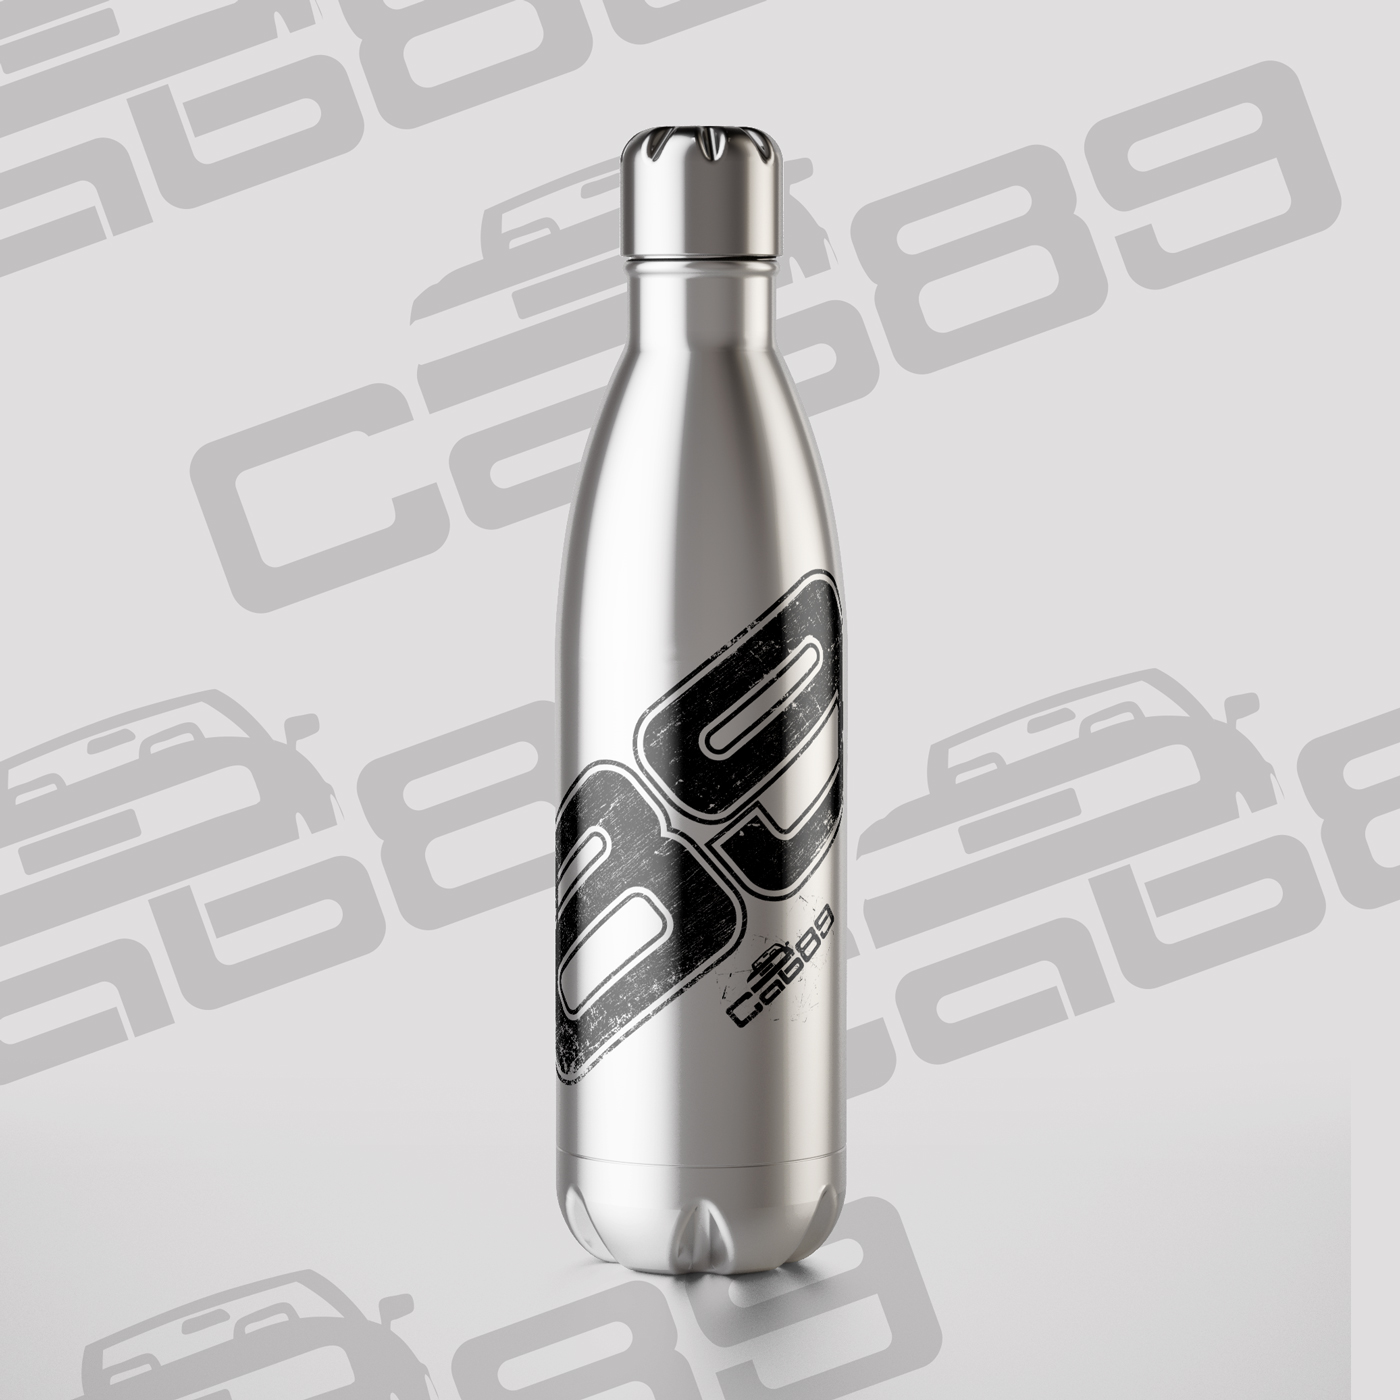 Edelstahl "Cab89" Thermosflasche